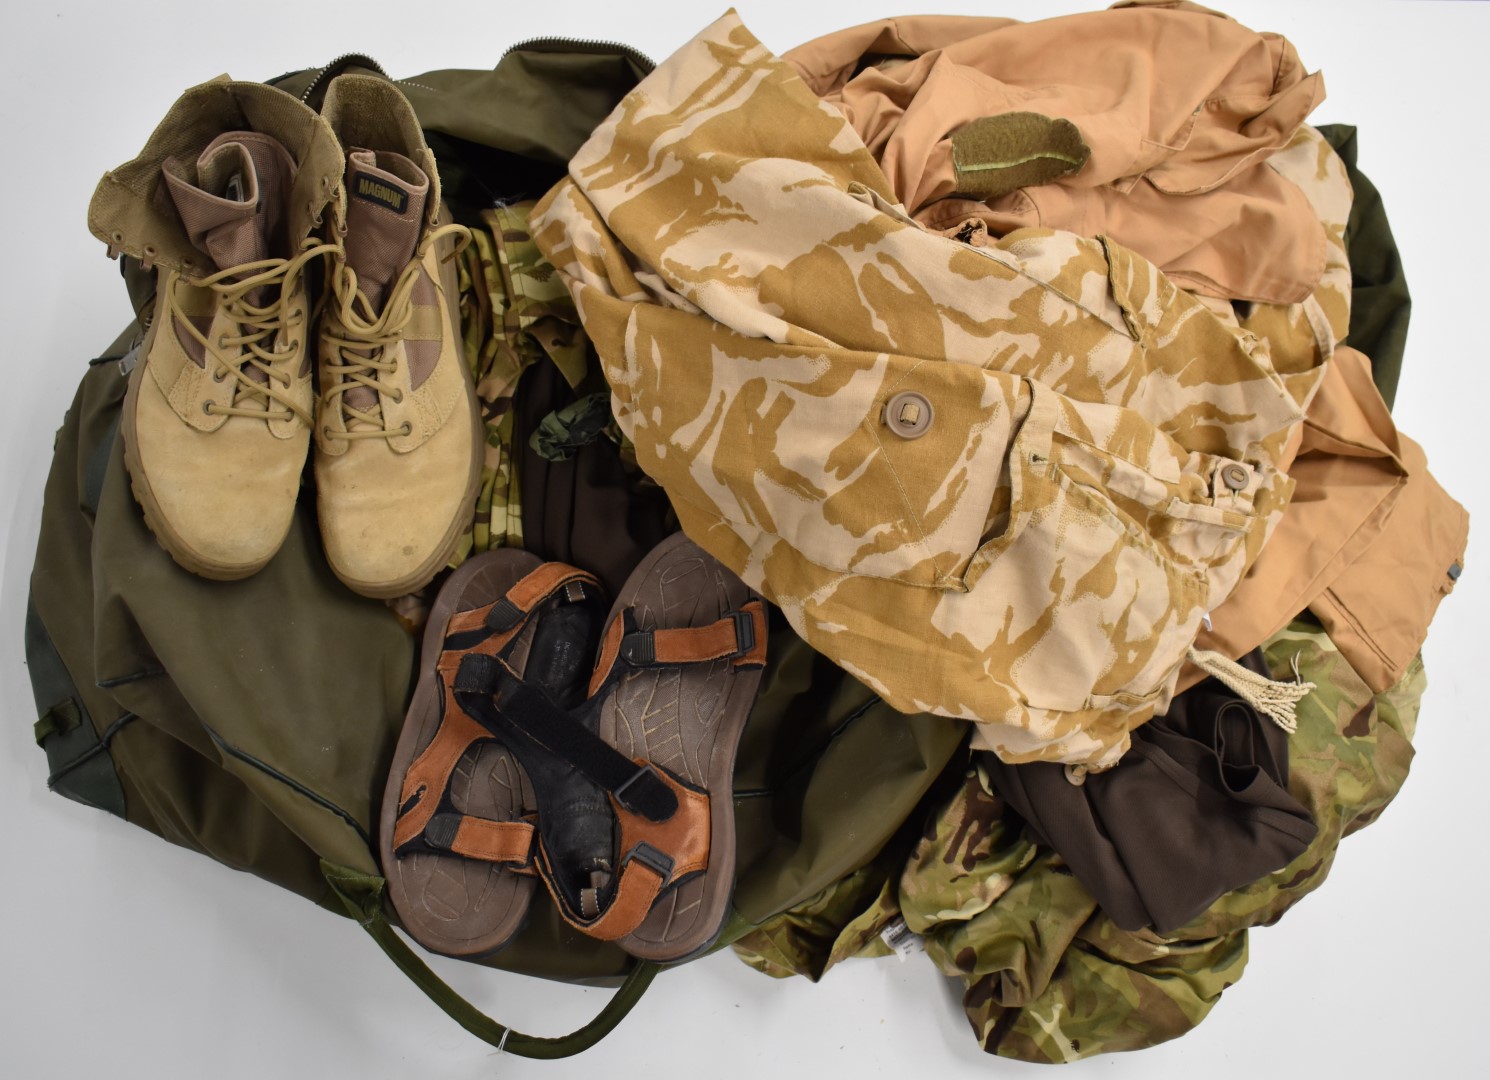 Royal Air Force / military kit including two Bergen's air crew holdalls, kit bag, air crew coveralls - Image 3 of 3